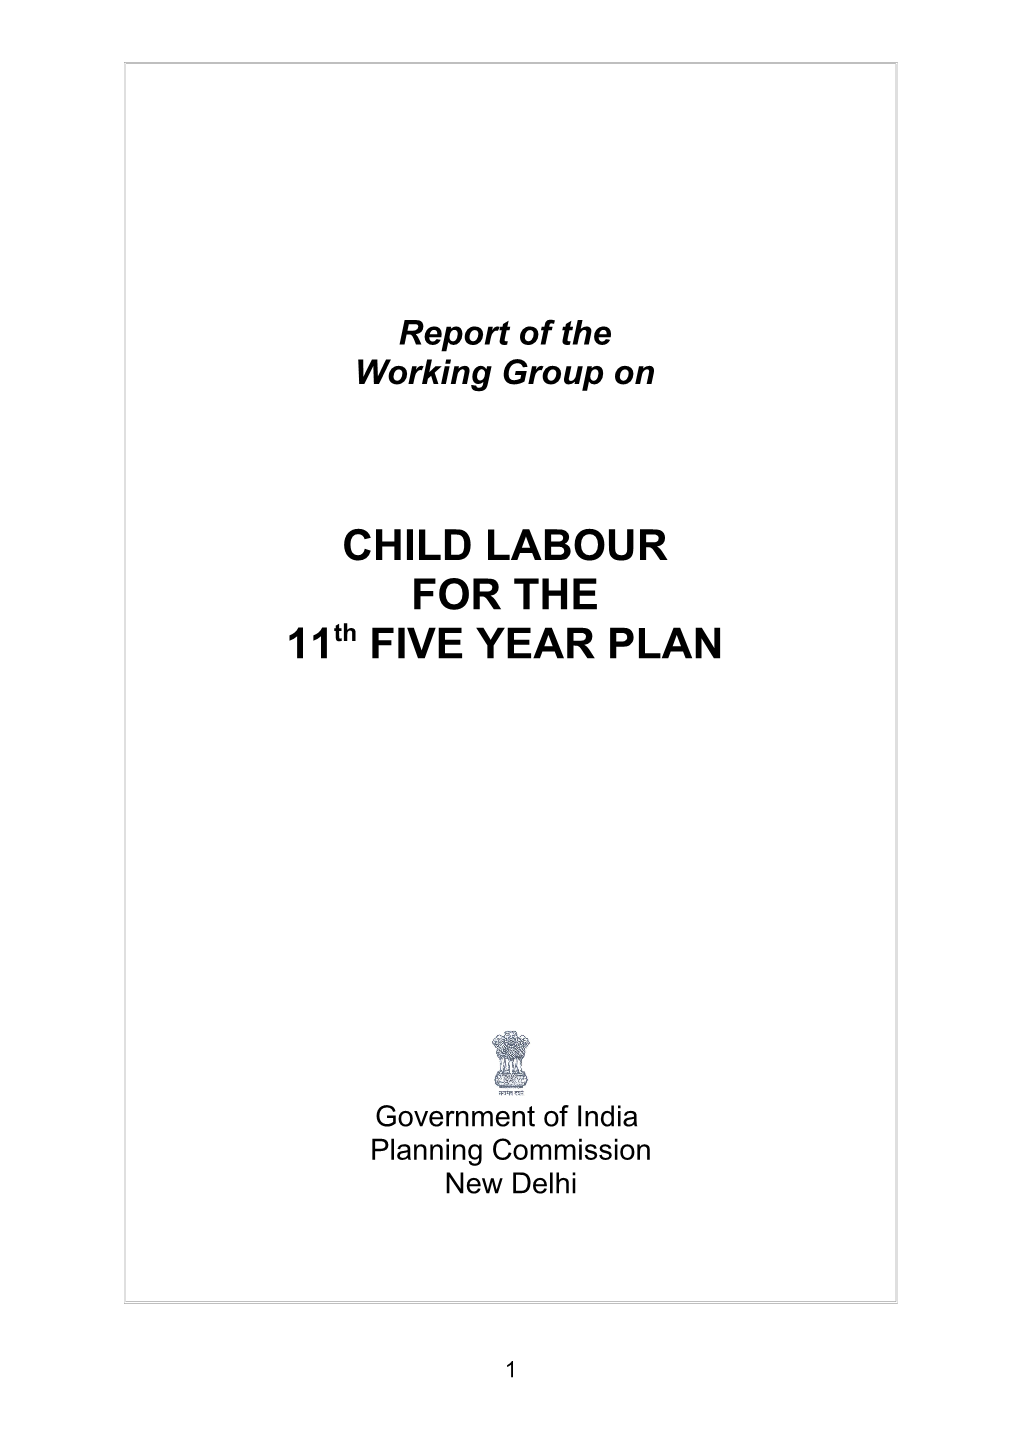 Background Paper for the Working Group on Child Labour